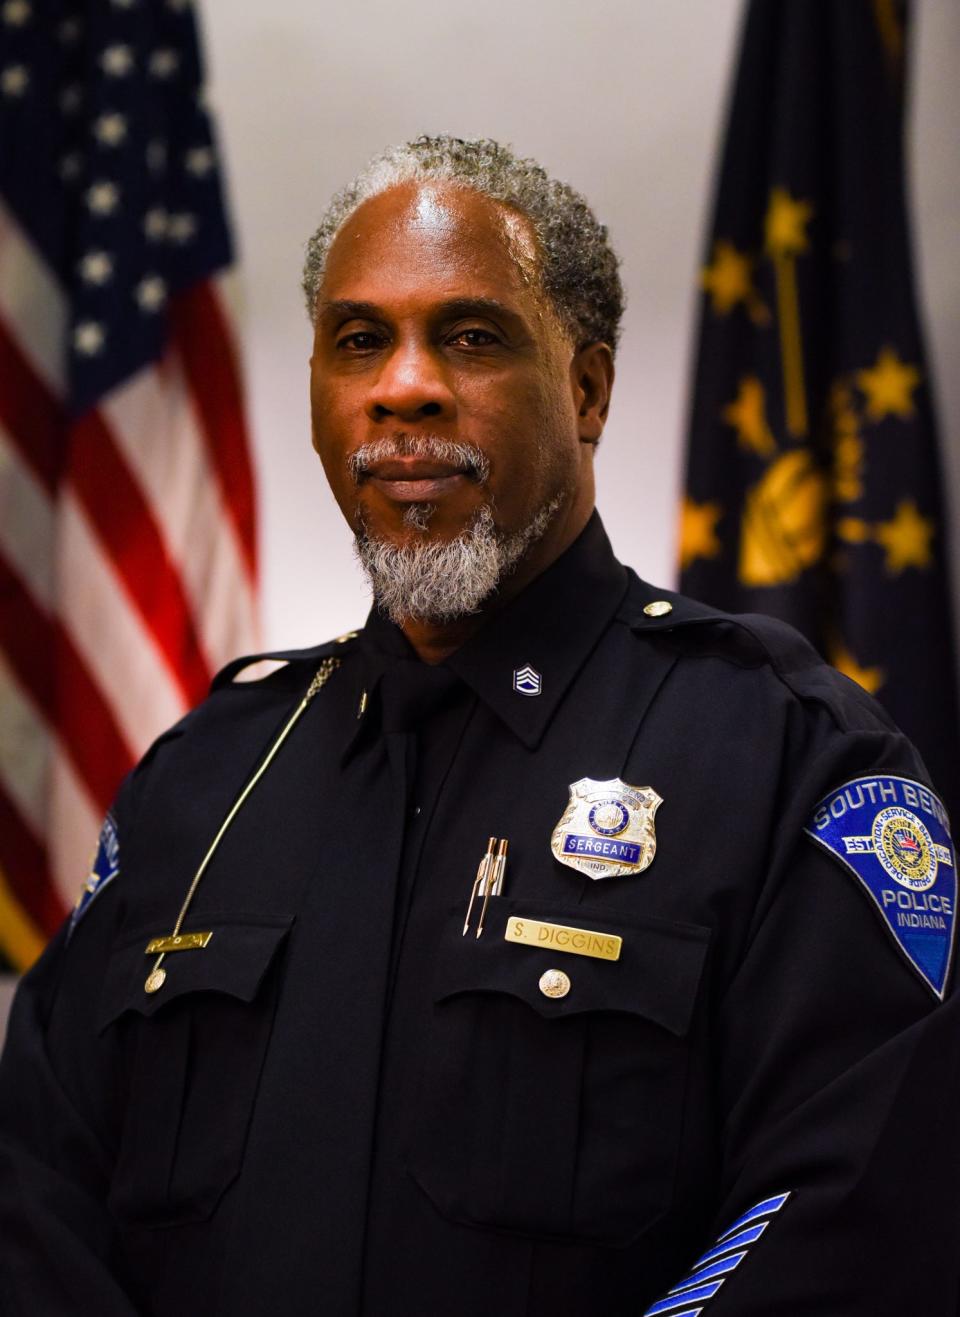 Sergeant Samuel Lee Diggins Jr. is honored by the city of South Bend for his efforts in leadership and public safety.